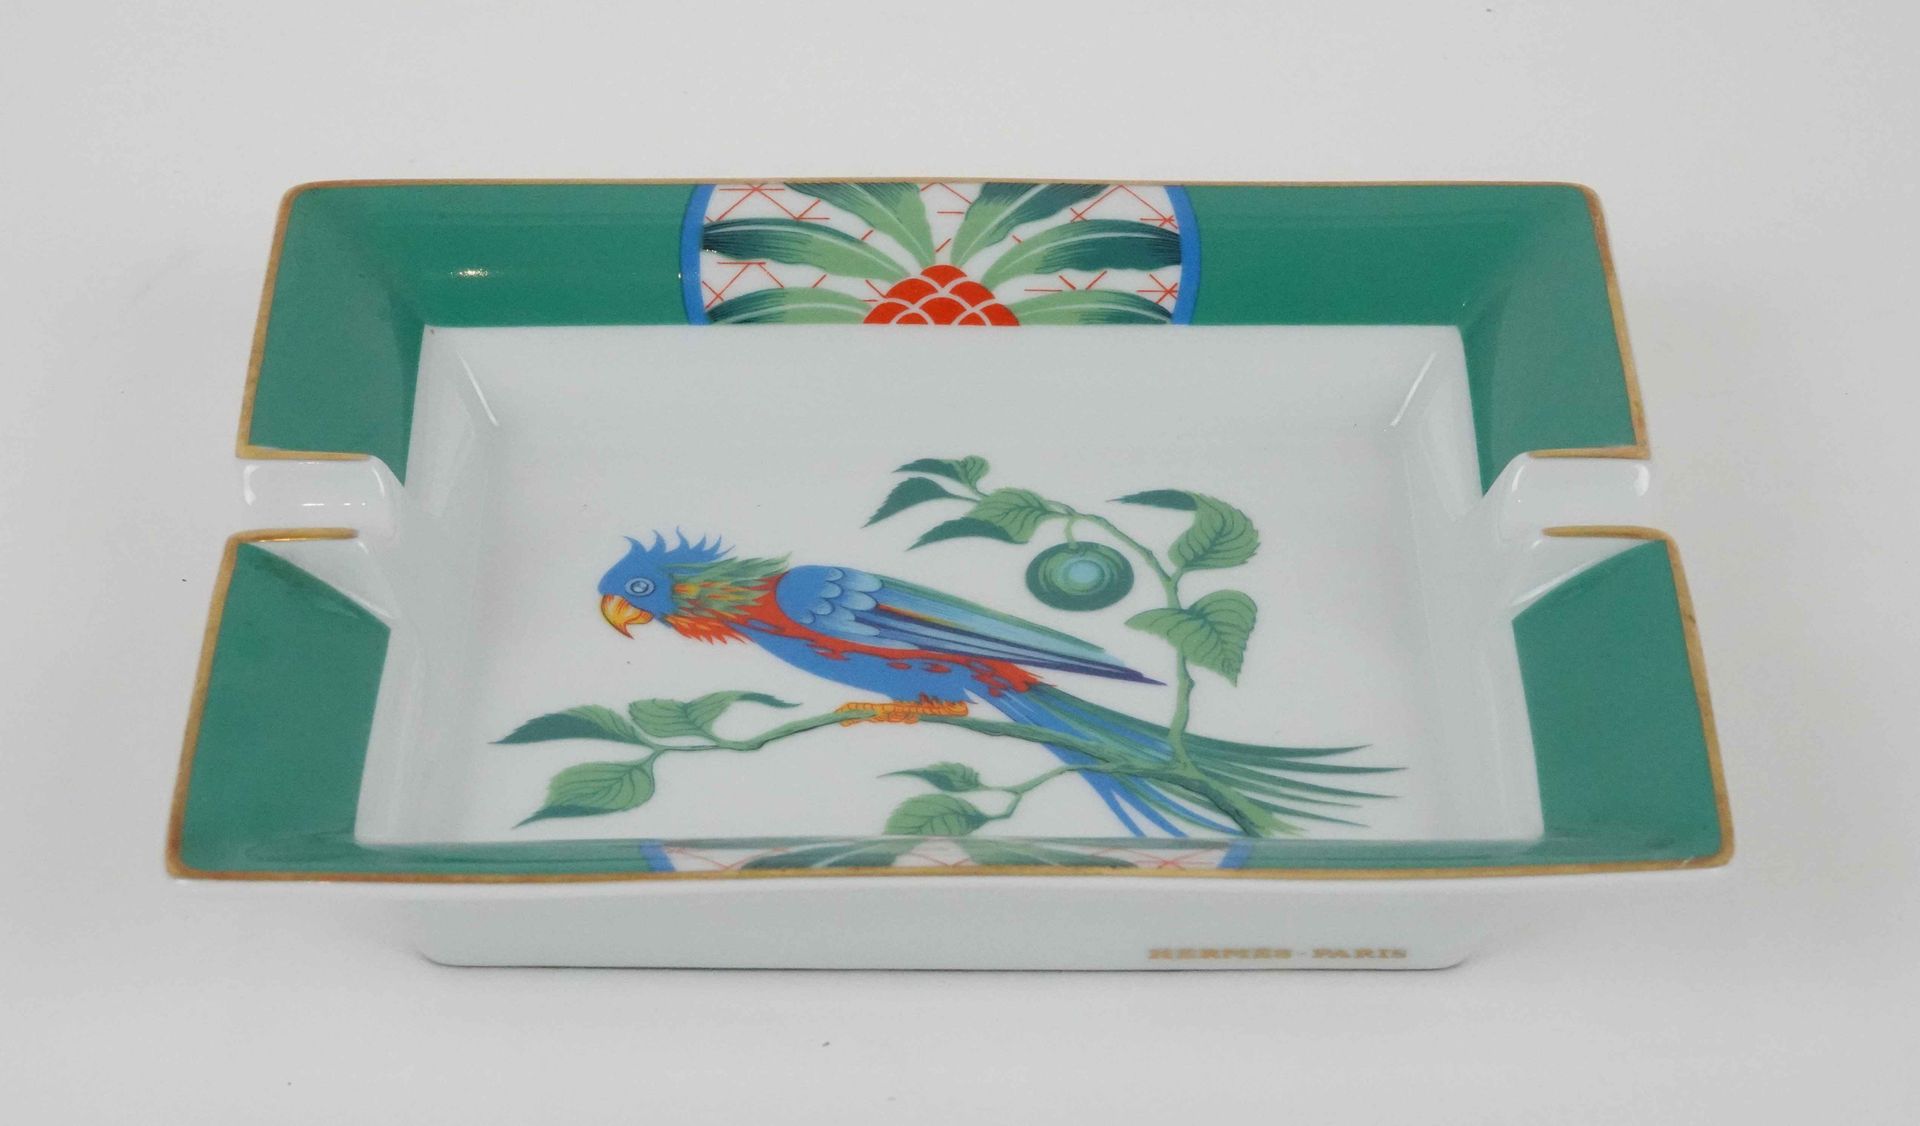 Null HERMES Paris Made in France

Enameled porcelain ashtray with a hip parrot d&hellip;